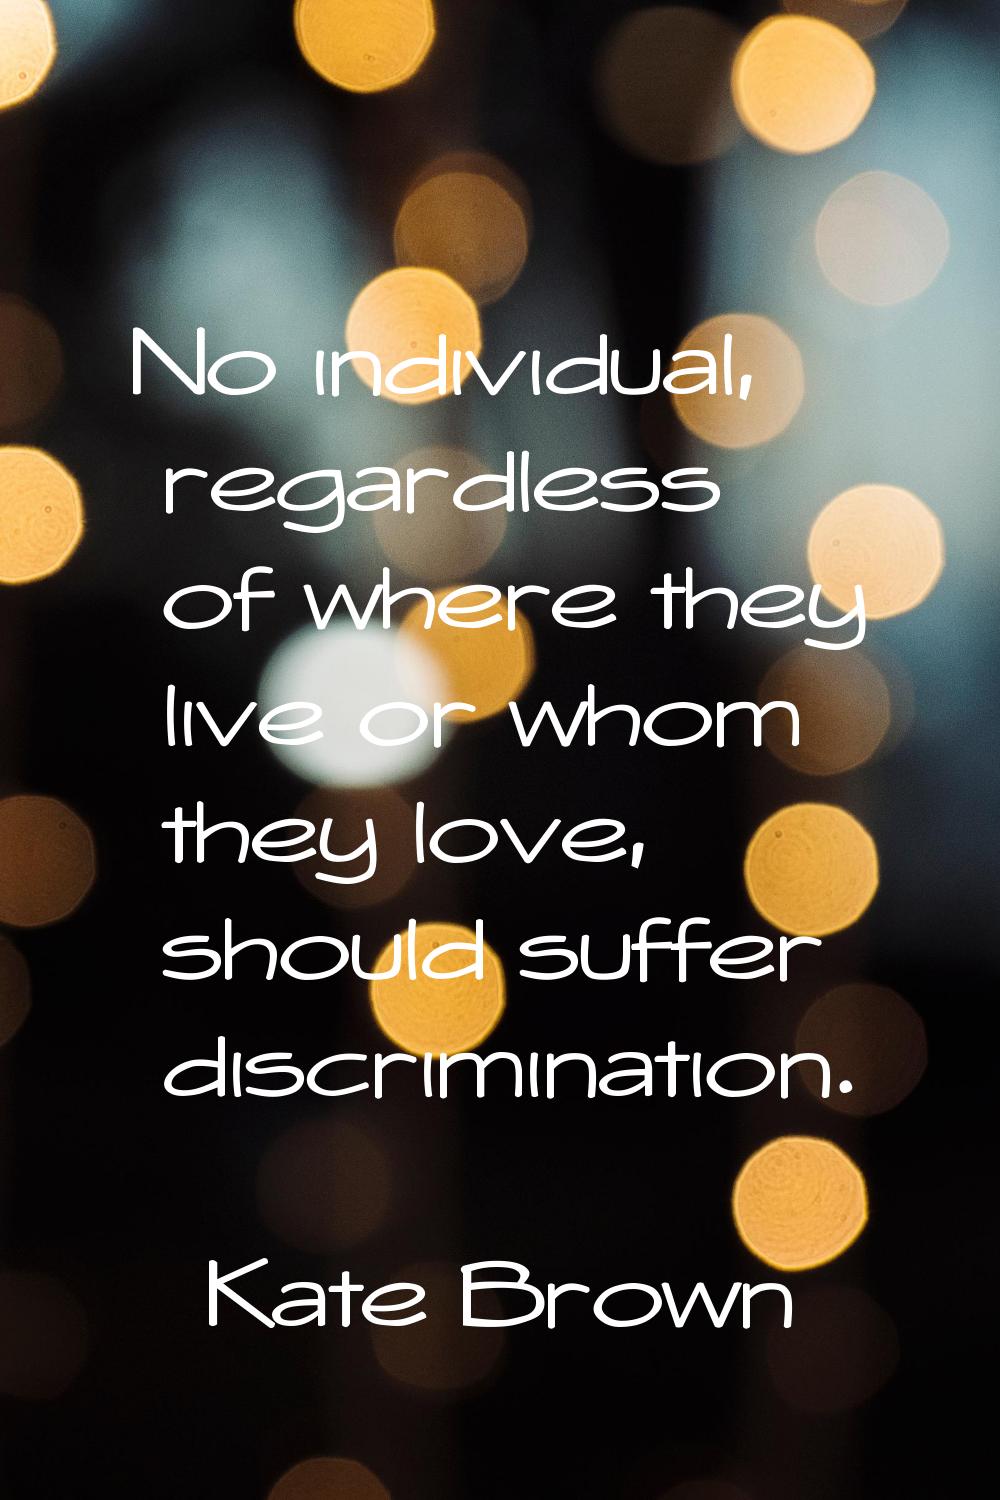 No individual, regardless of where they live or whom they love, should suffer discrimination.